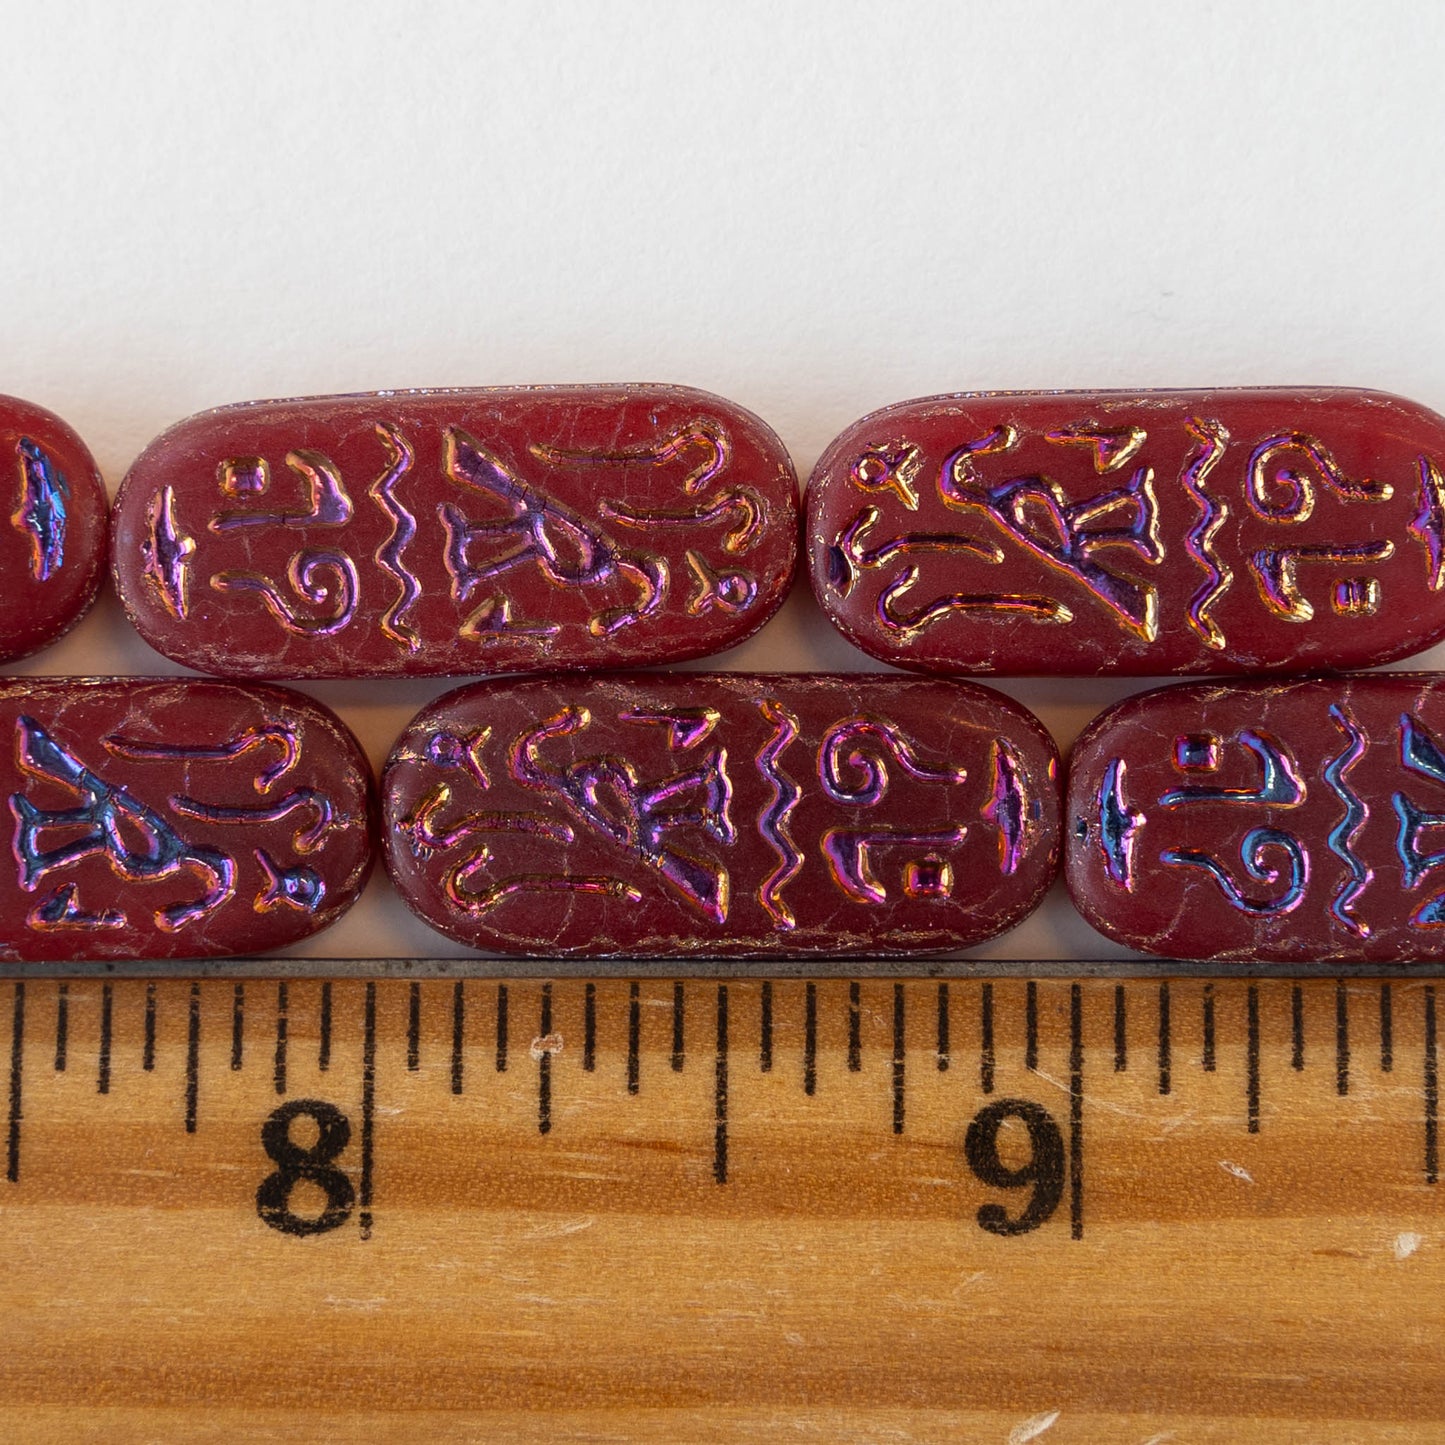 10x25mm Cartouche Beads -  Red Opaline Matte with Iridescent Purple/Blue Finish - 4